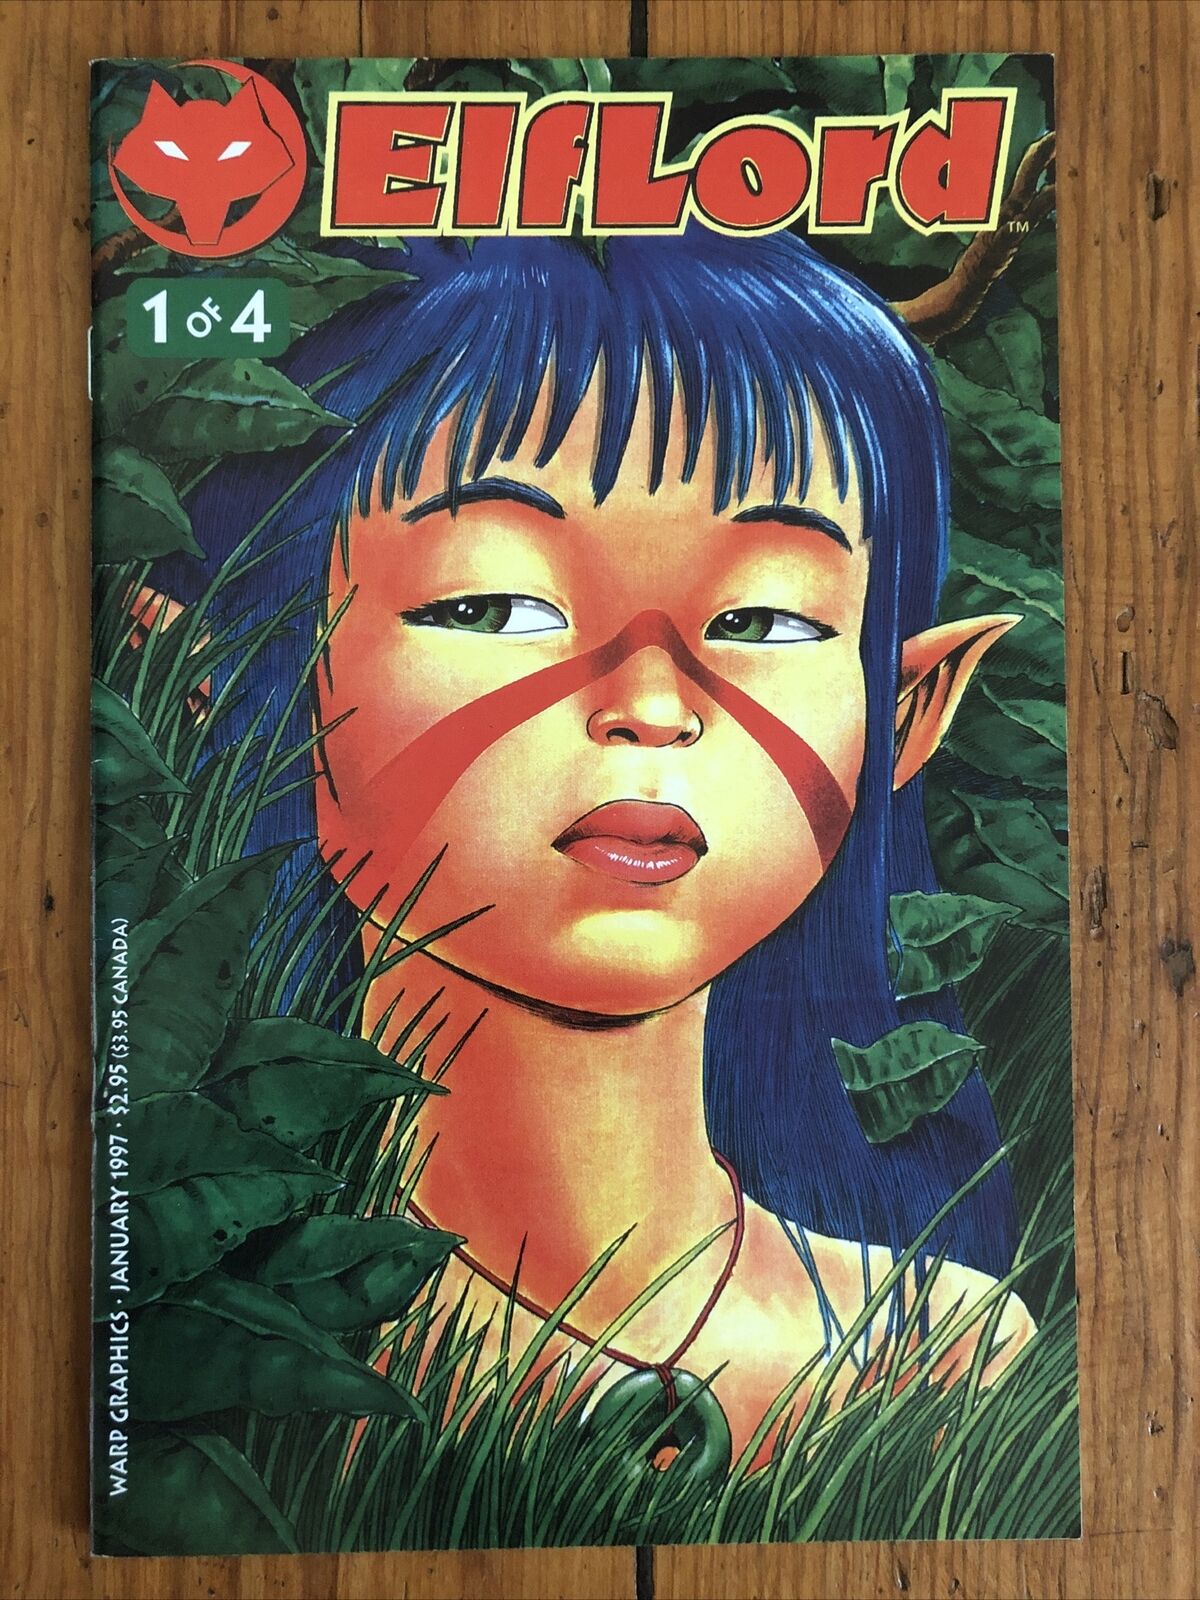 Elflord #1 (of 4) Warp Graphics 1997 Barry Blair, Colin Chan, Indie Fantasy FINE